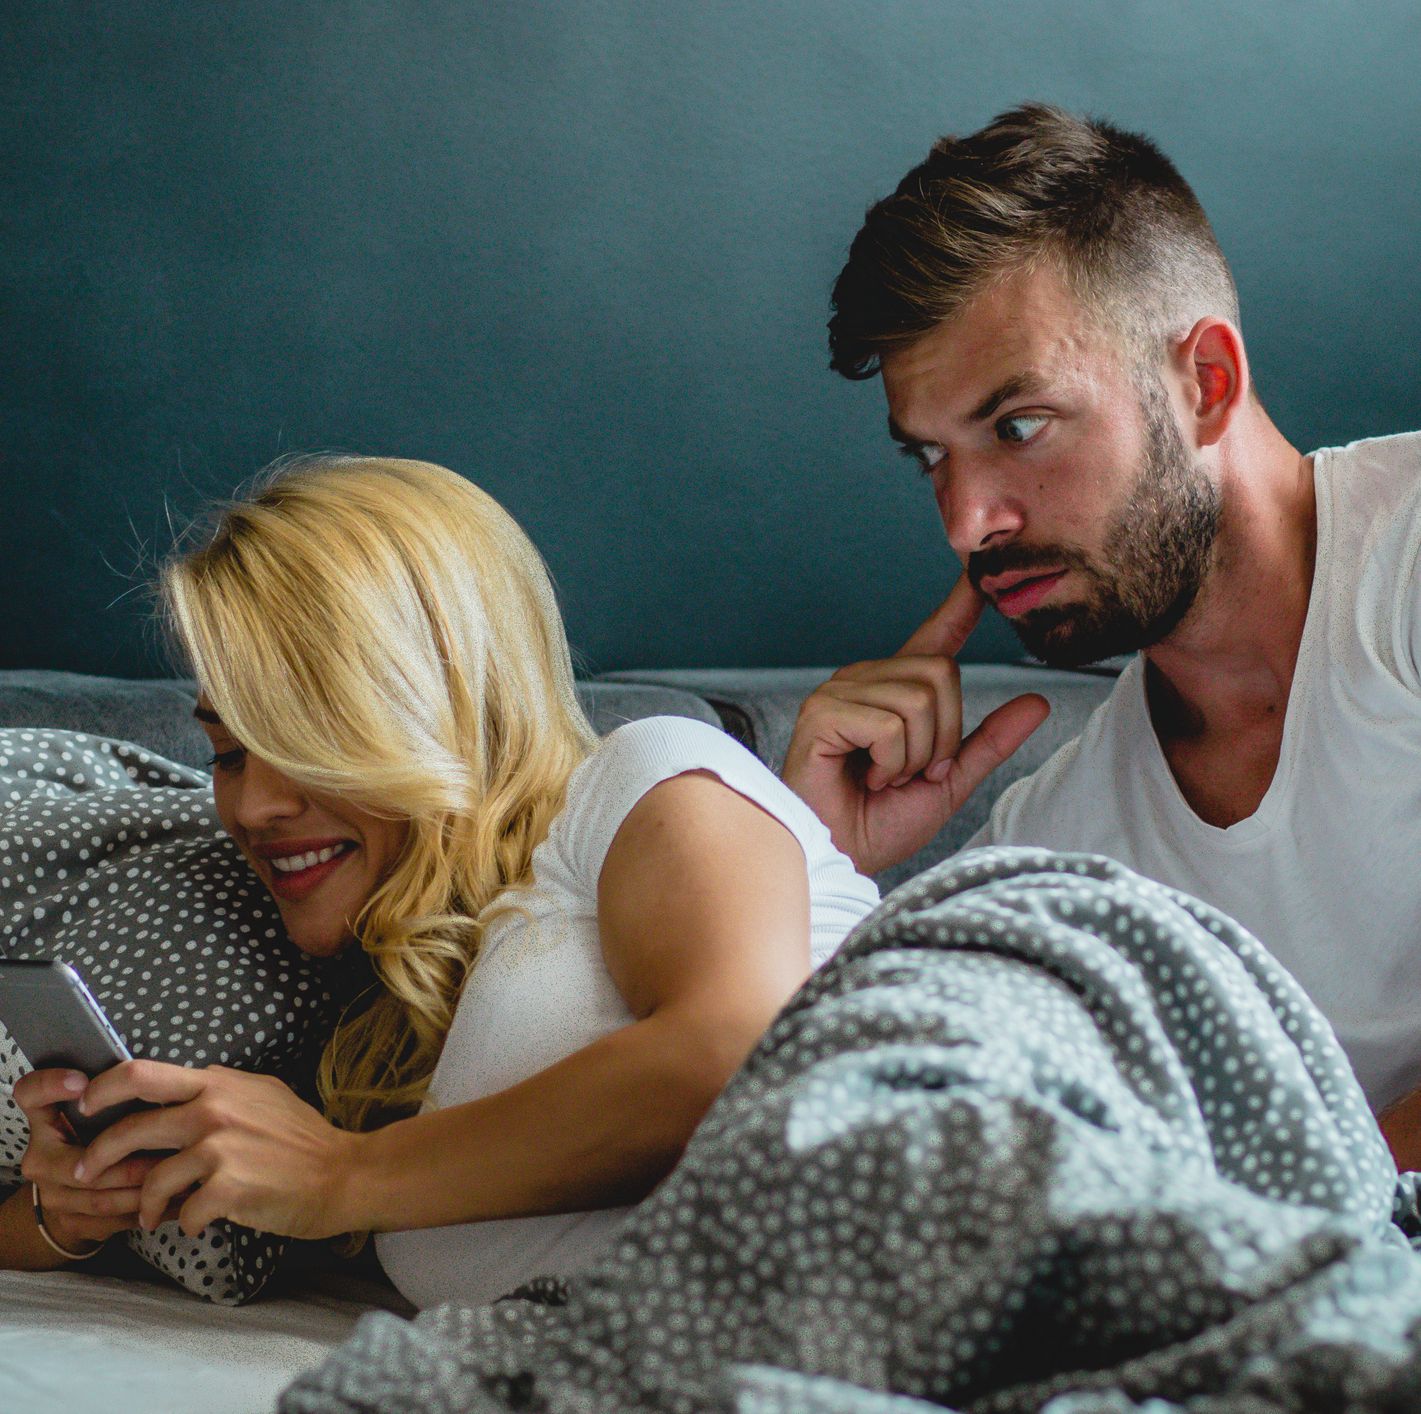 My New Girlfriend Is Amazing—but I'm Convinced She's Going to Cheat